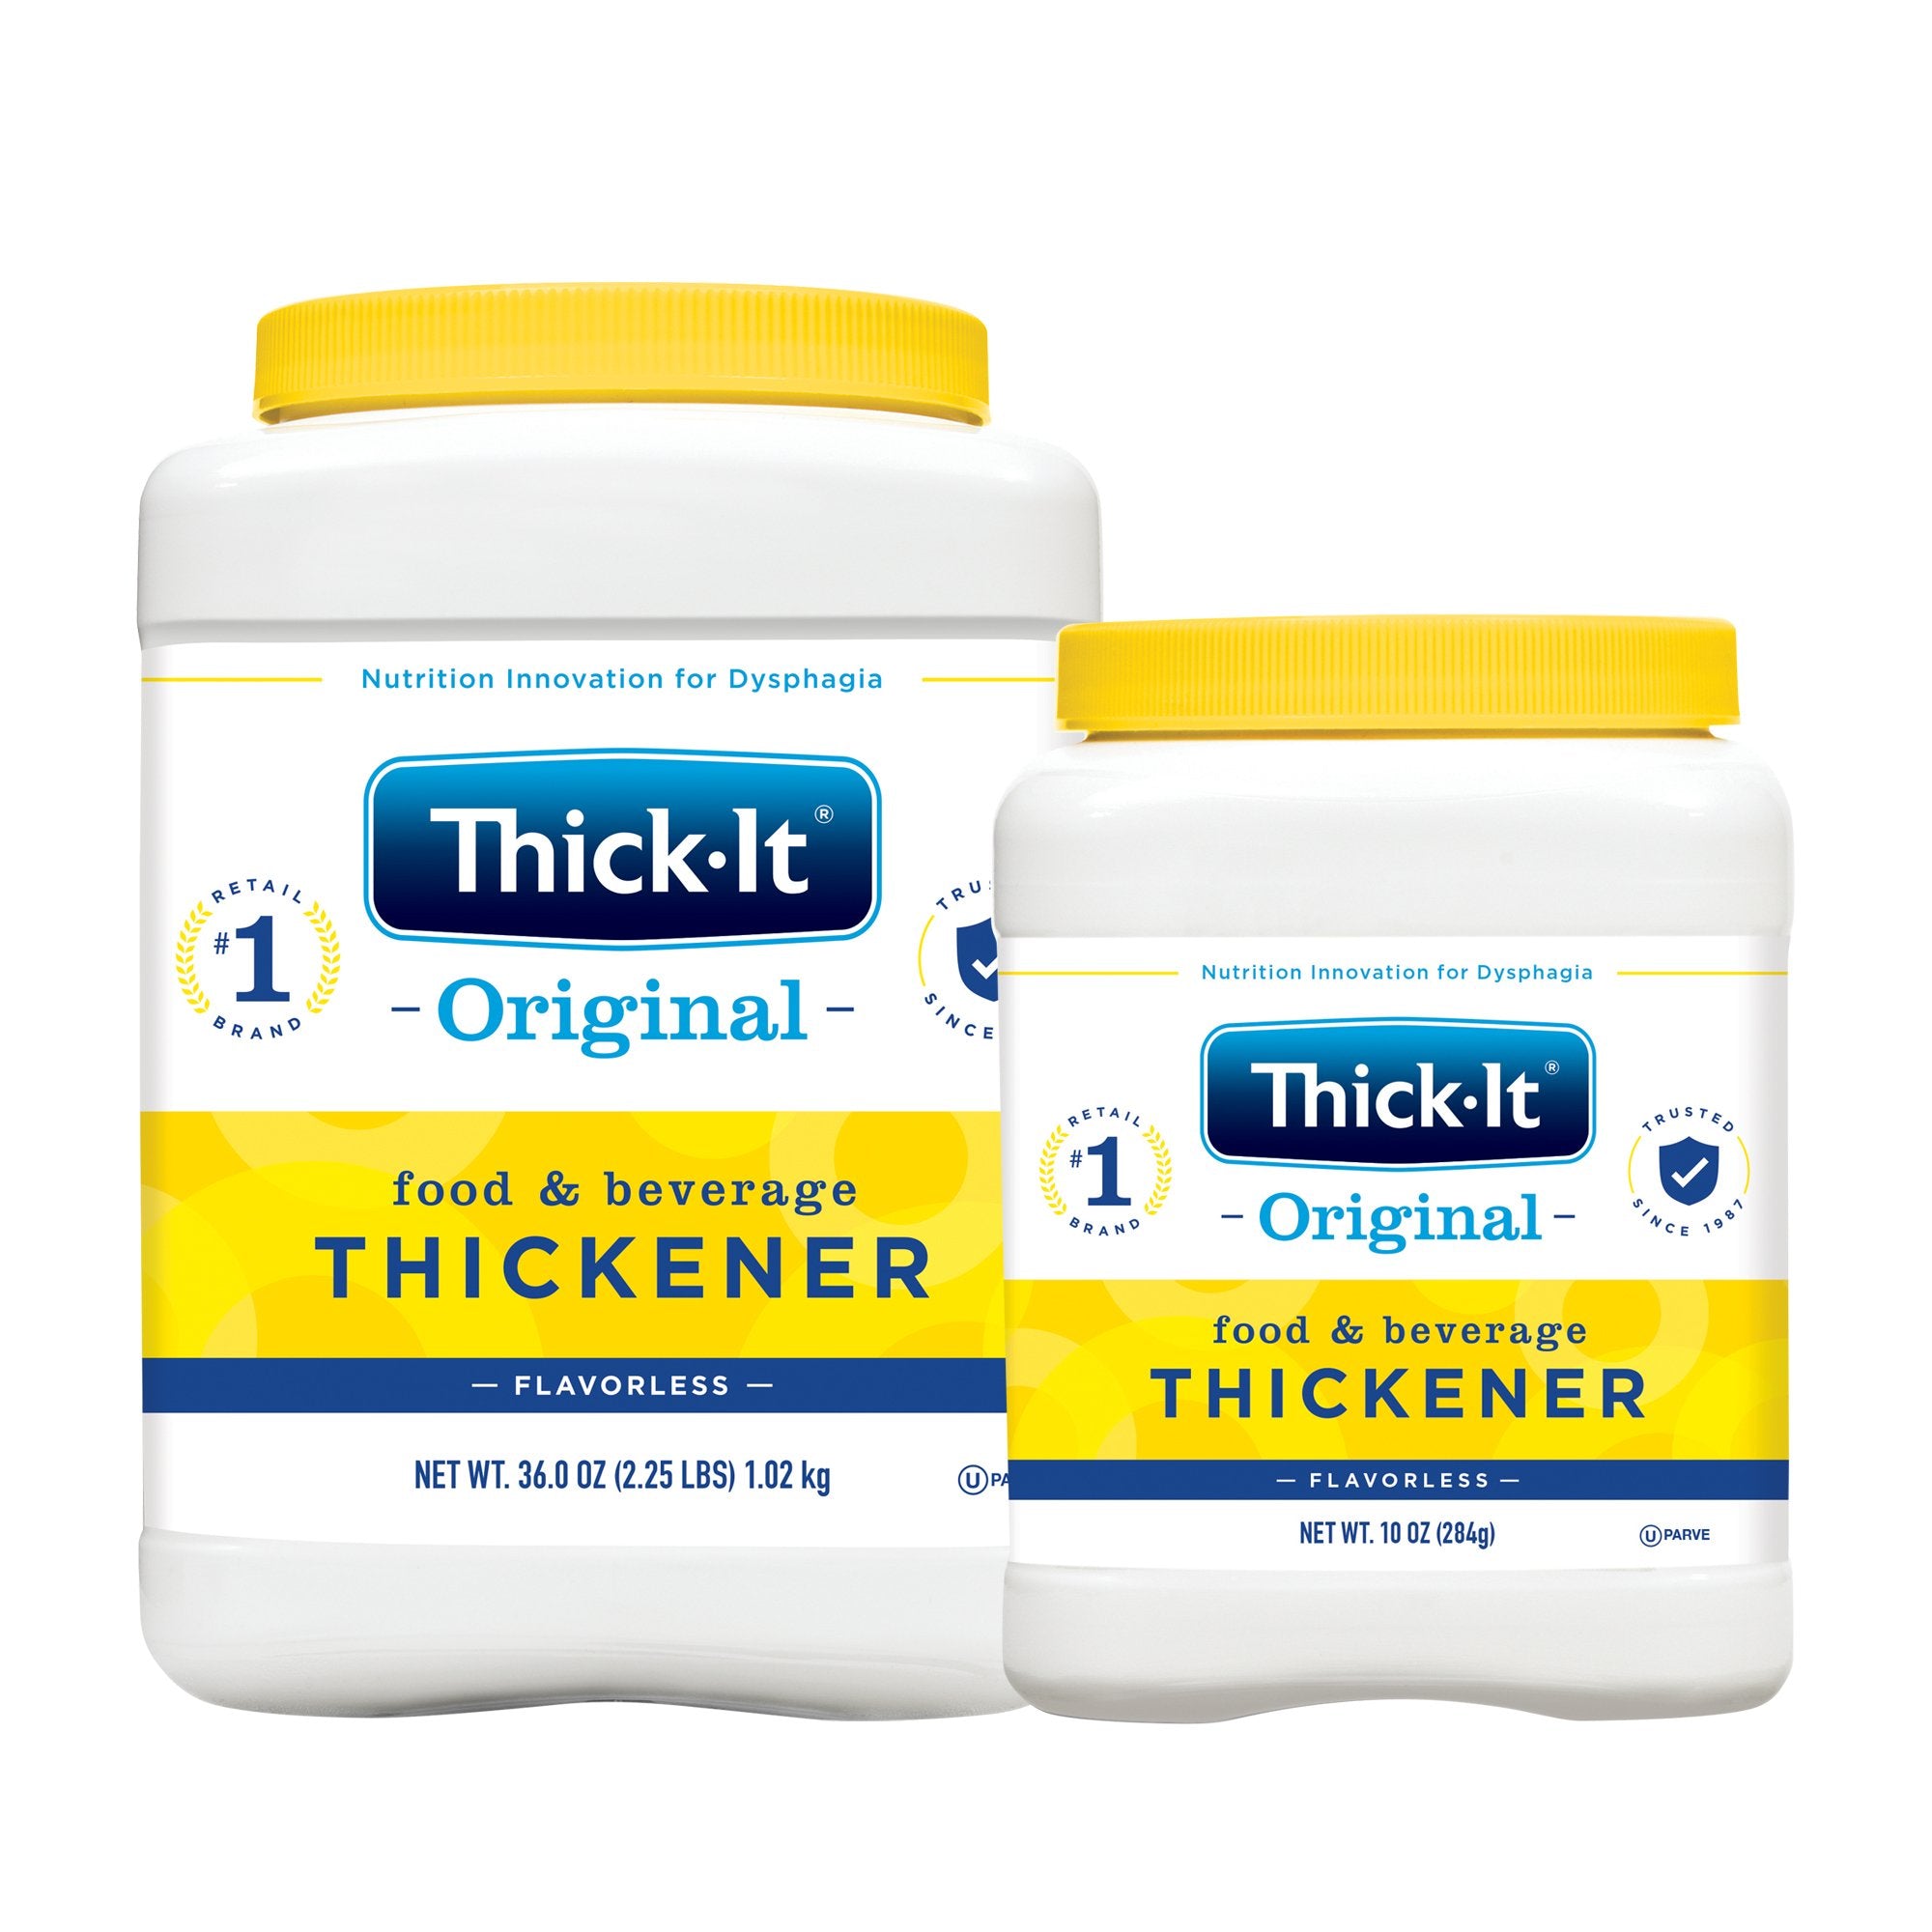 Food and Beverage Thickener Thick-It Original 10 oz. Canister Unflavored Powder IDDSI Level 0 Thin